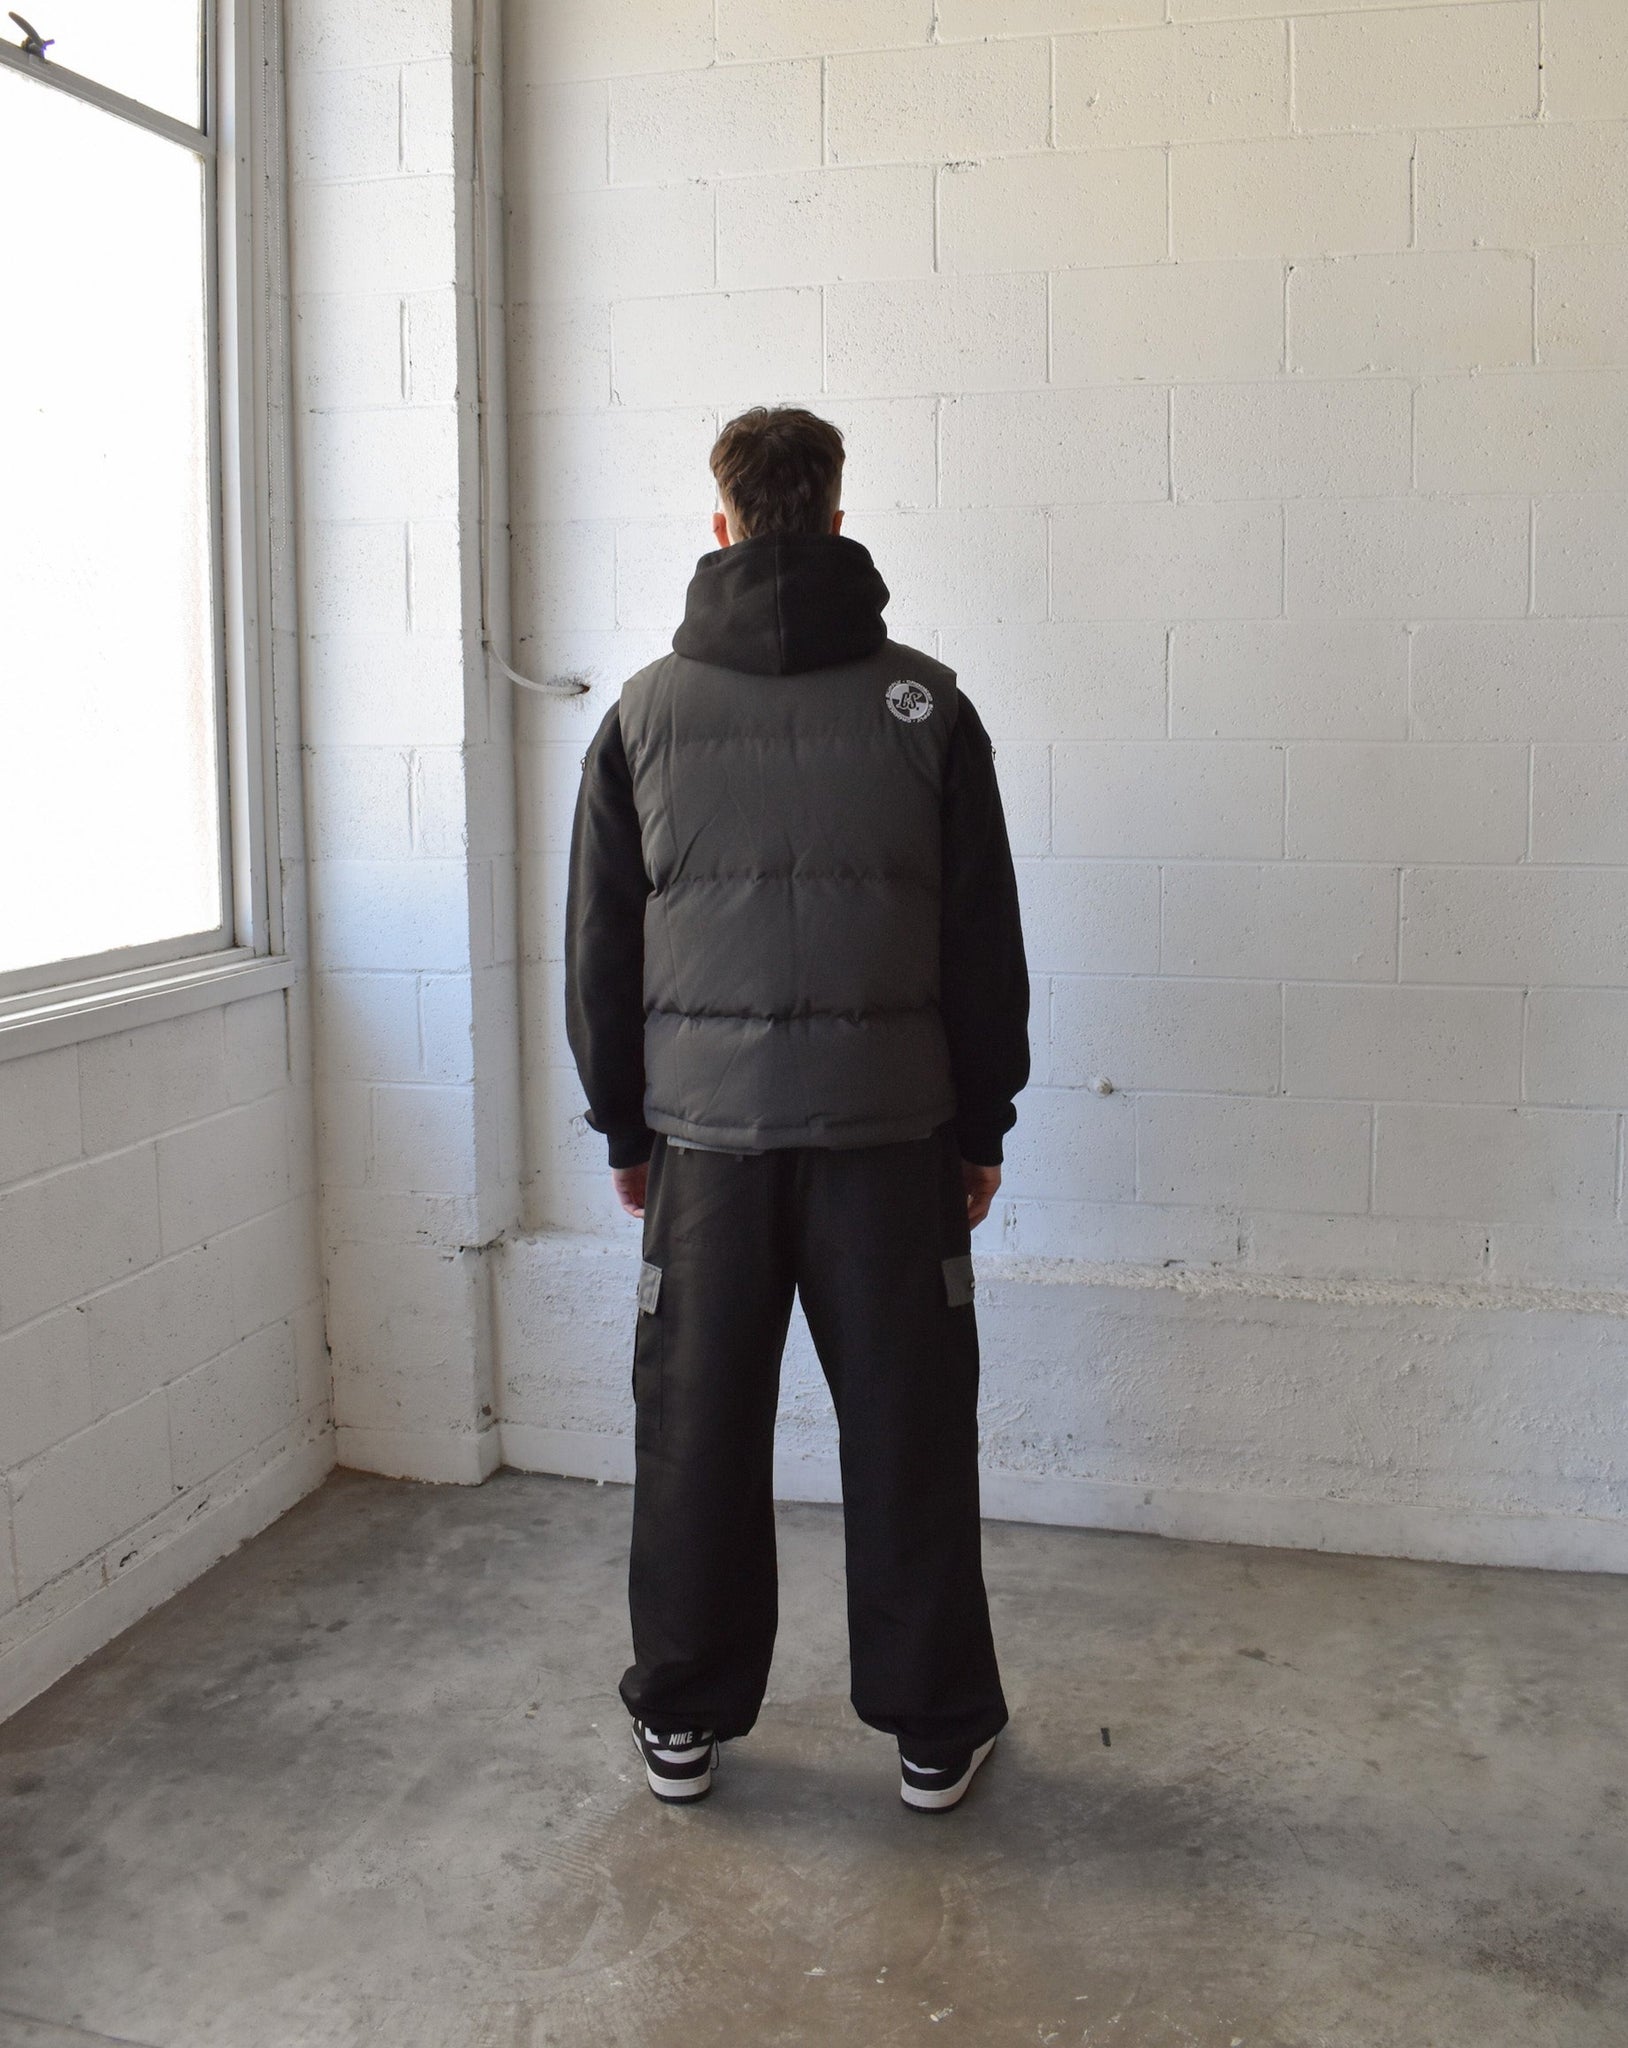 2-Tone Puffer Vest - Charcoal & Grey (Down Fill)